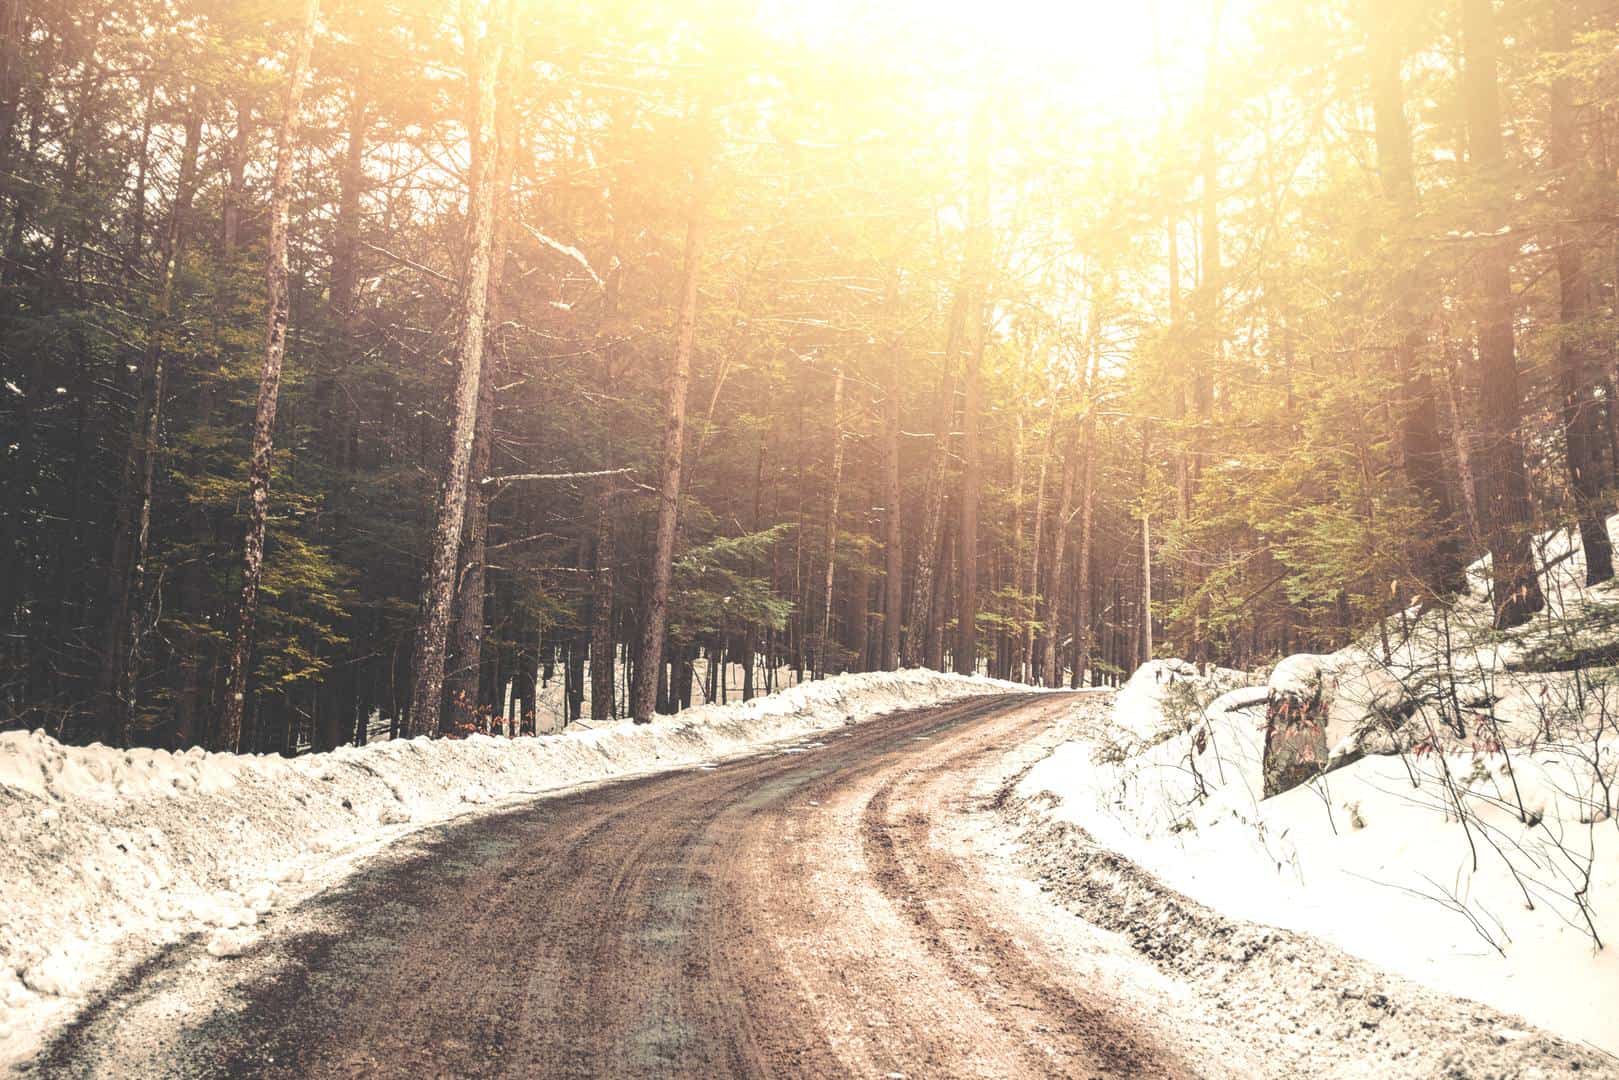 Winter Road, Photo by Billy Huynh on Unsplash